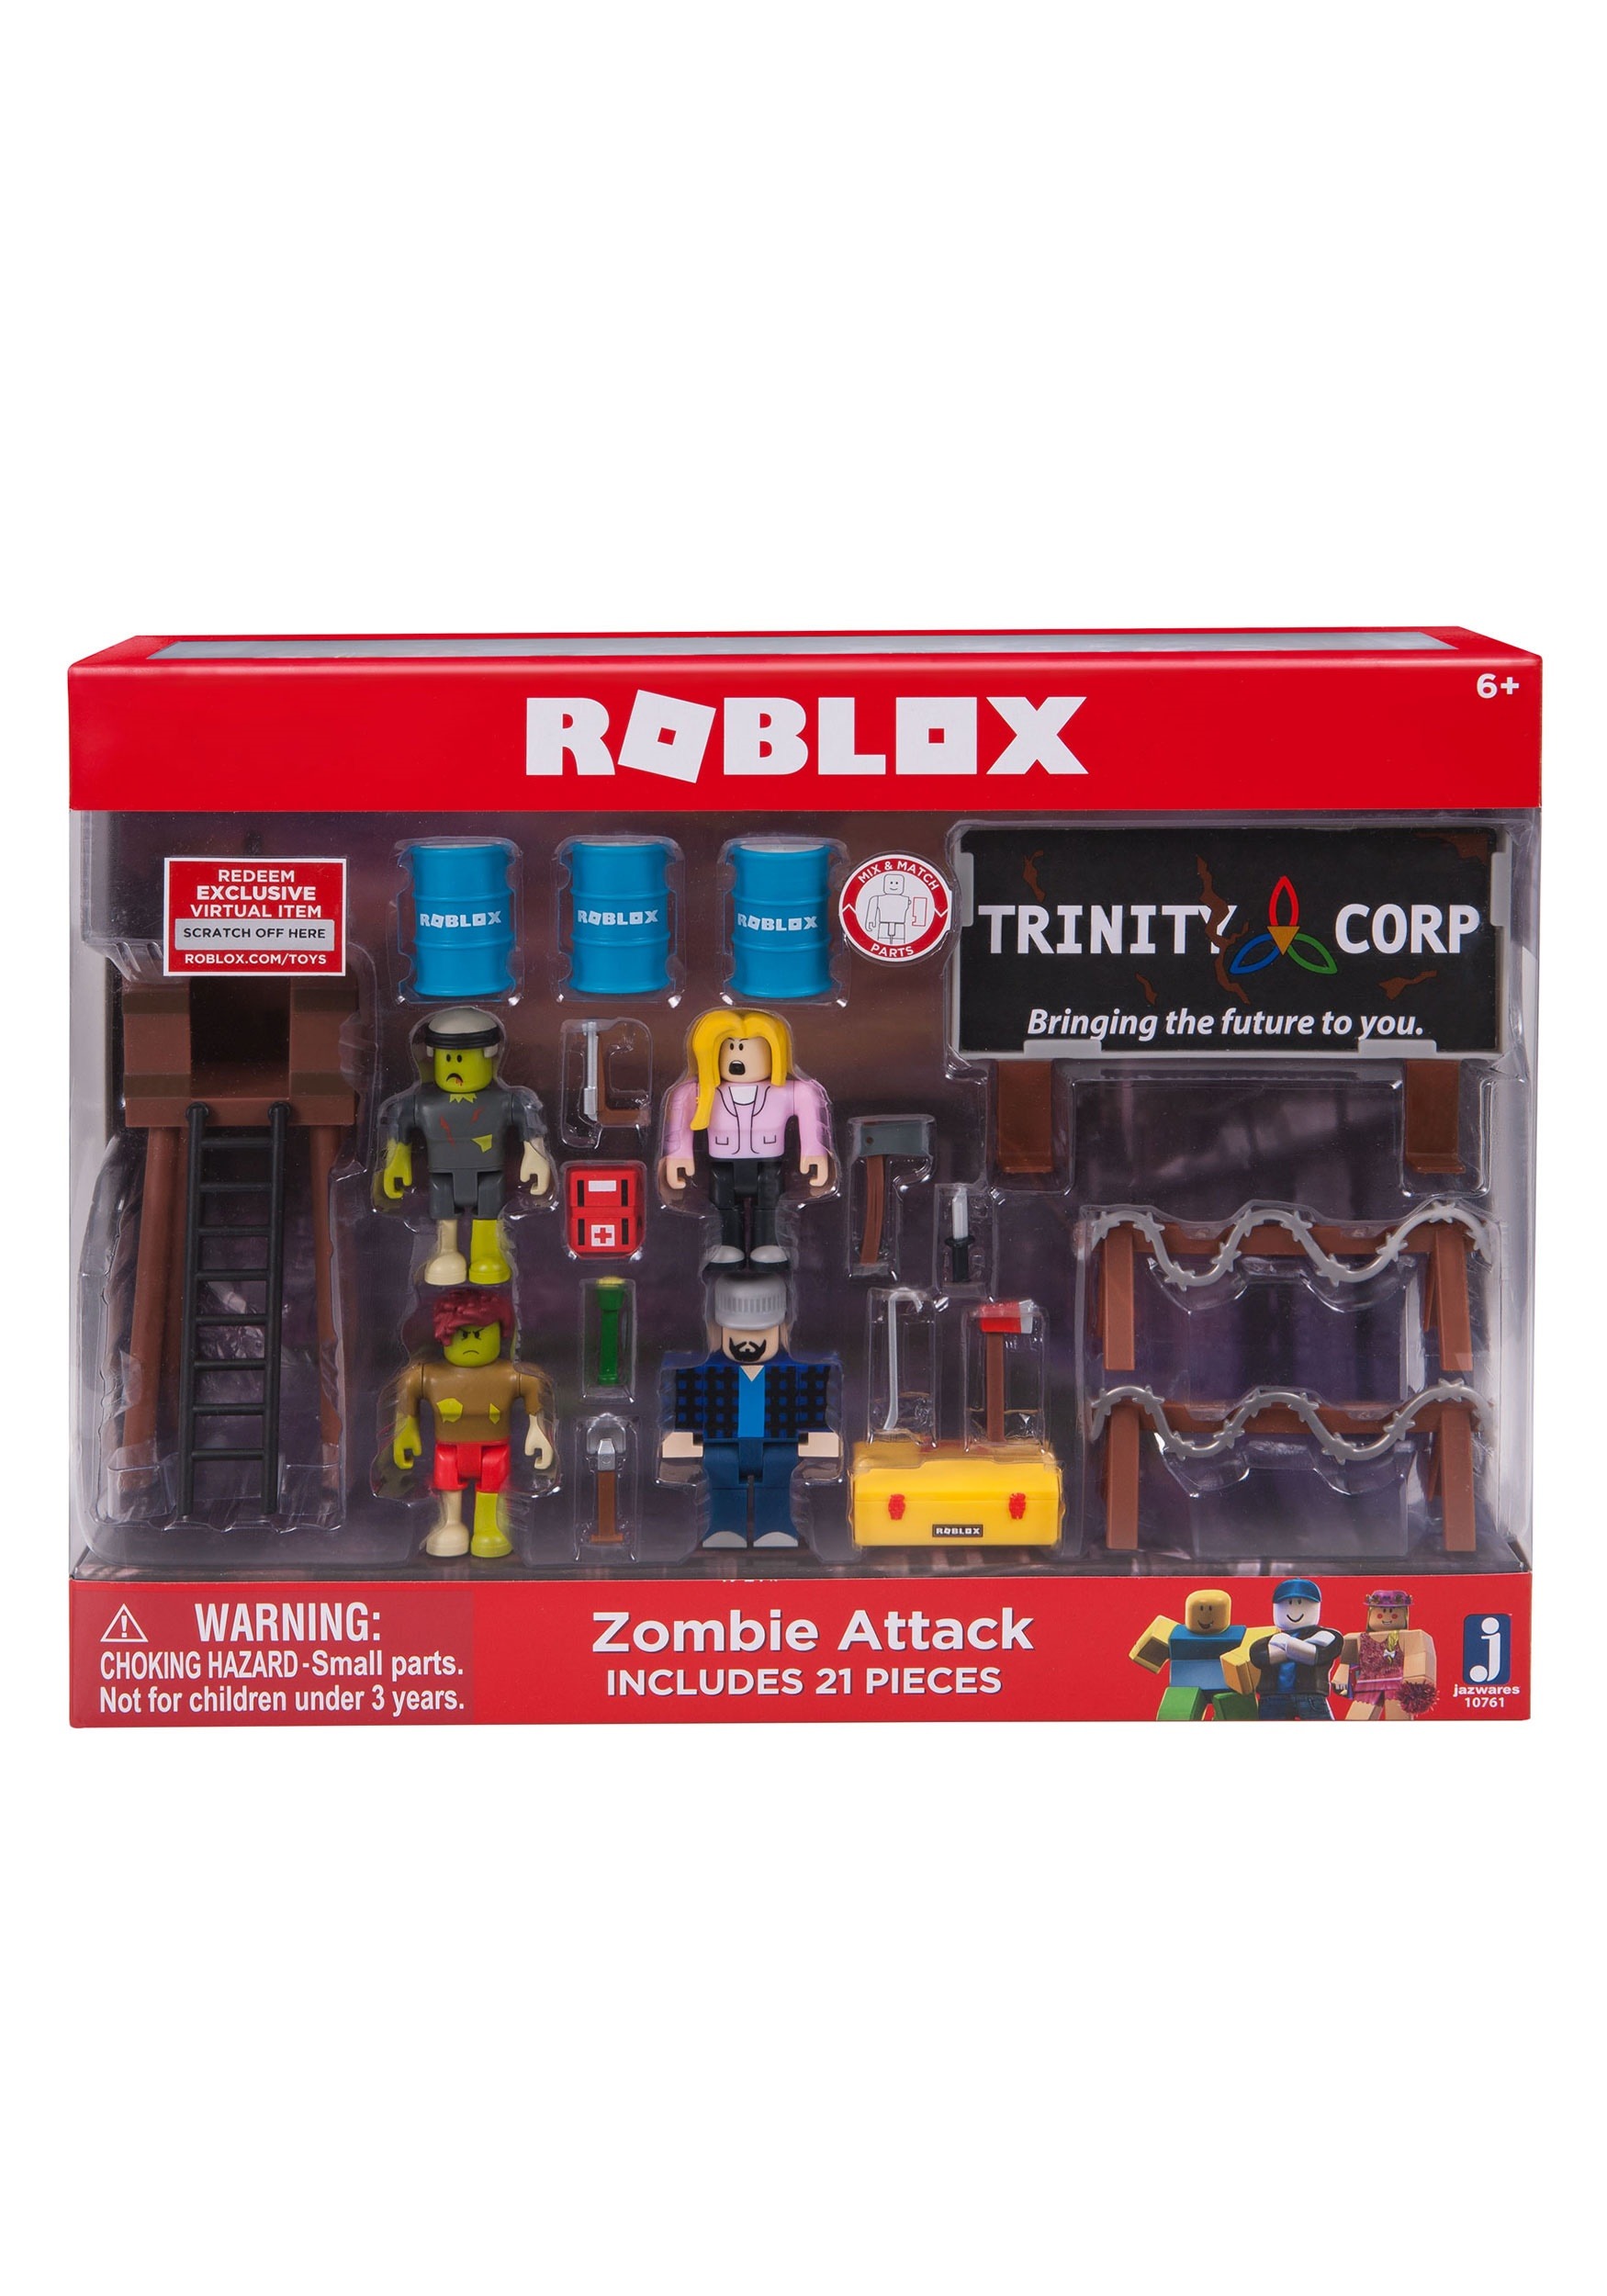 Zombie Attack Environment Set Roblox